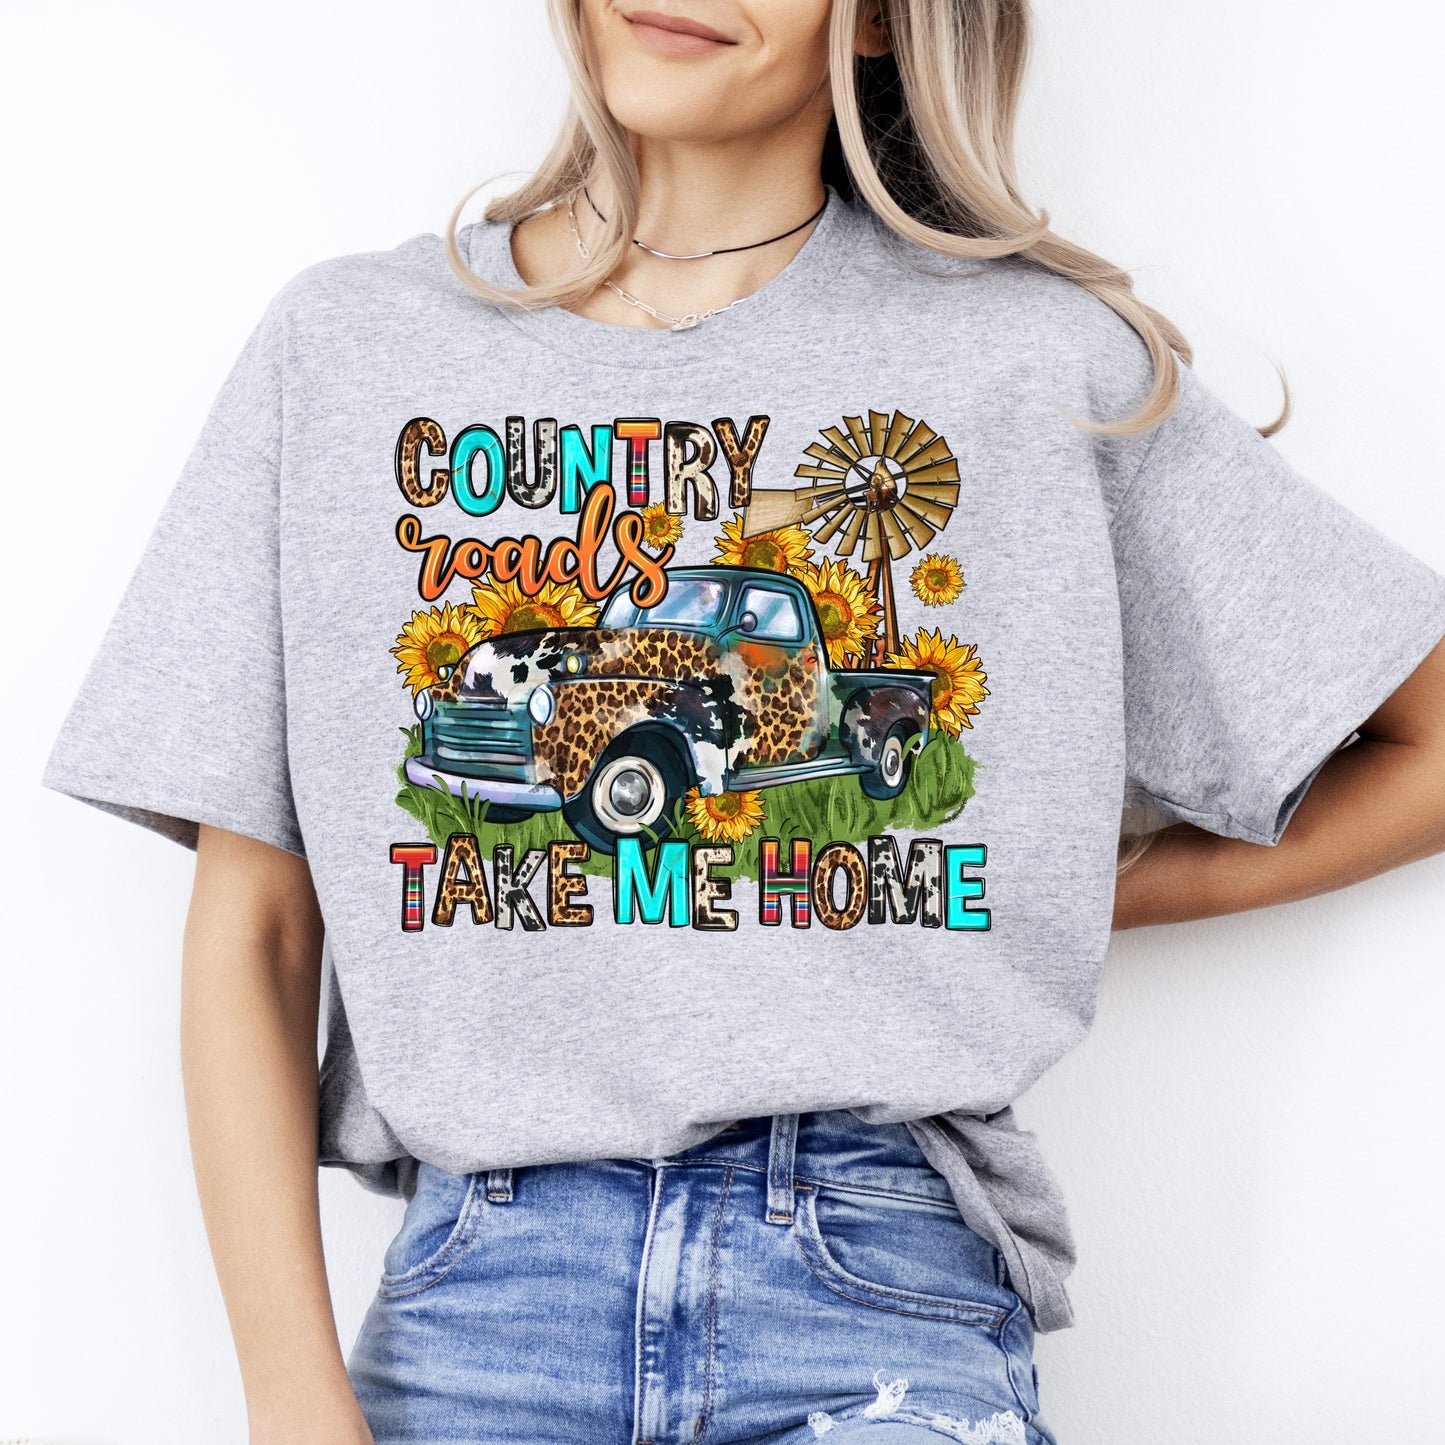 Western country track T-Shirt sunflower cow skin windmill Unisex tee White Sand Sport Grey-Sport Grey-Family-Gift-Planet